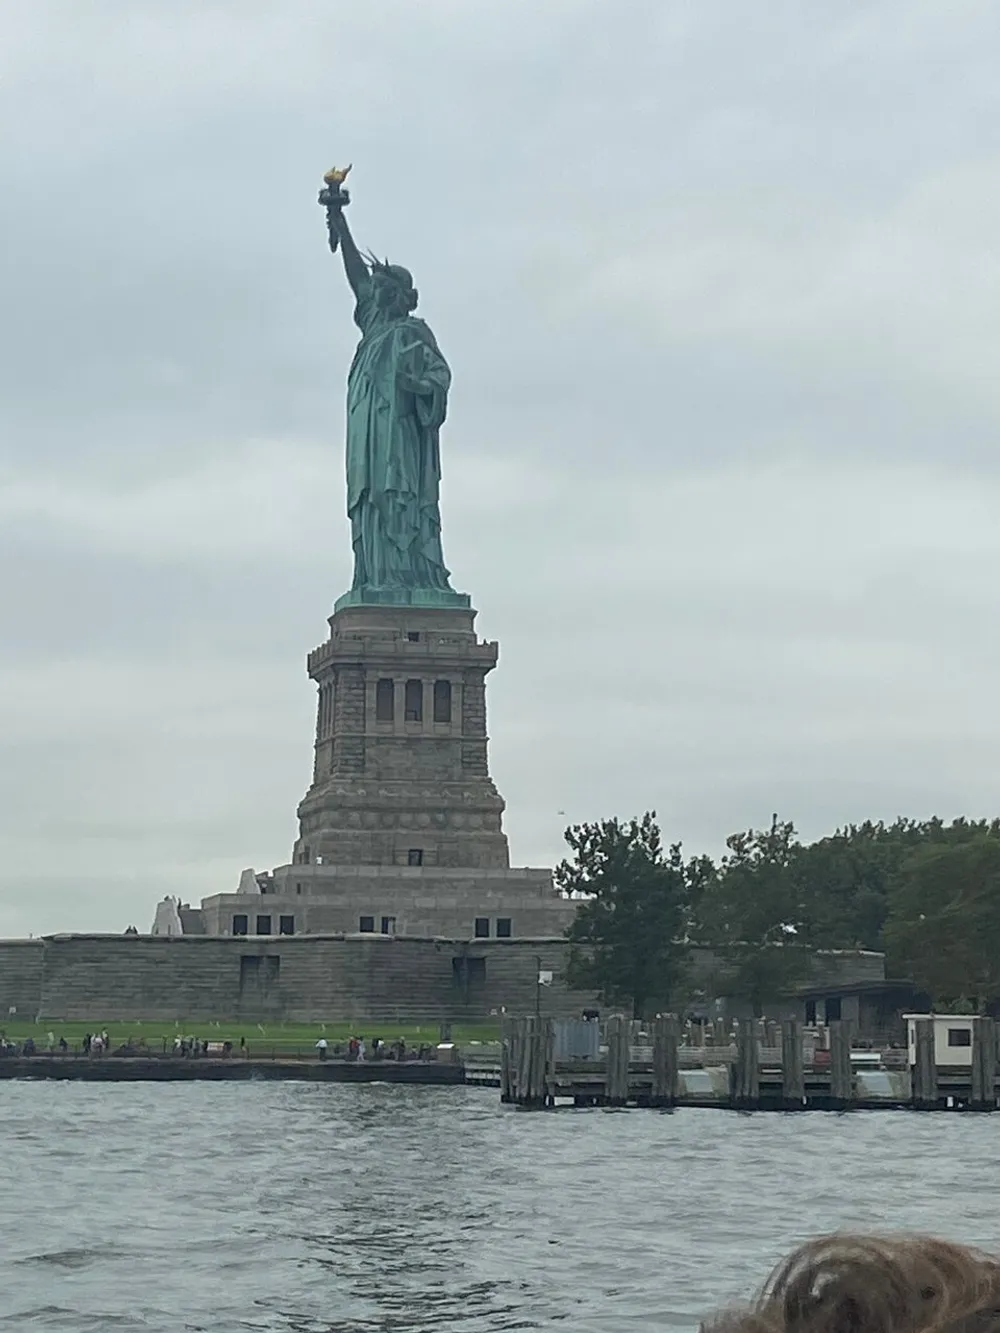 The Statue of Liberty is seen standing tall against an overcast sky viewed from the water with a glimpse of visitors near its base